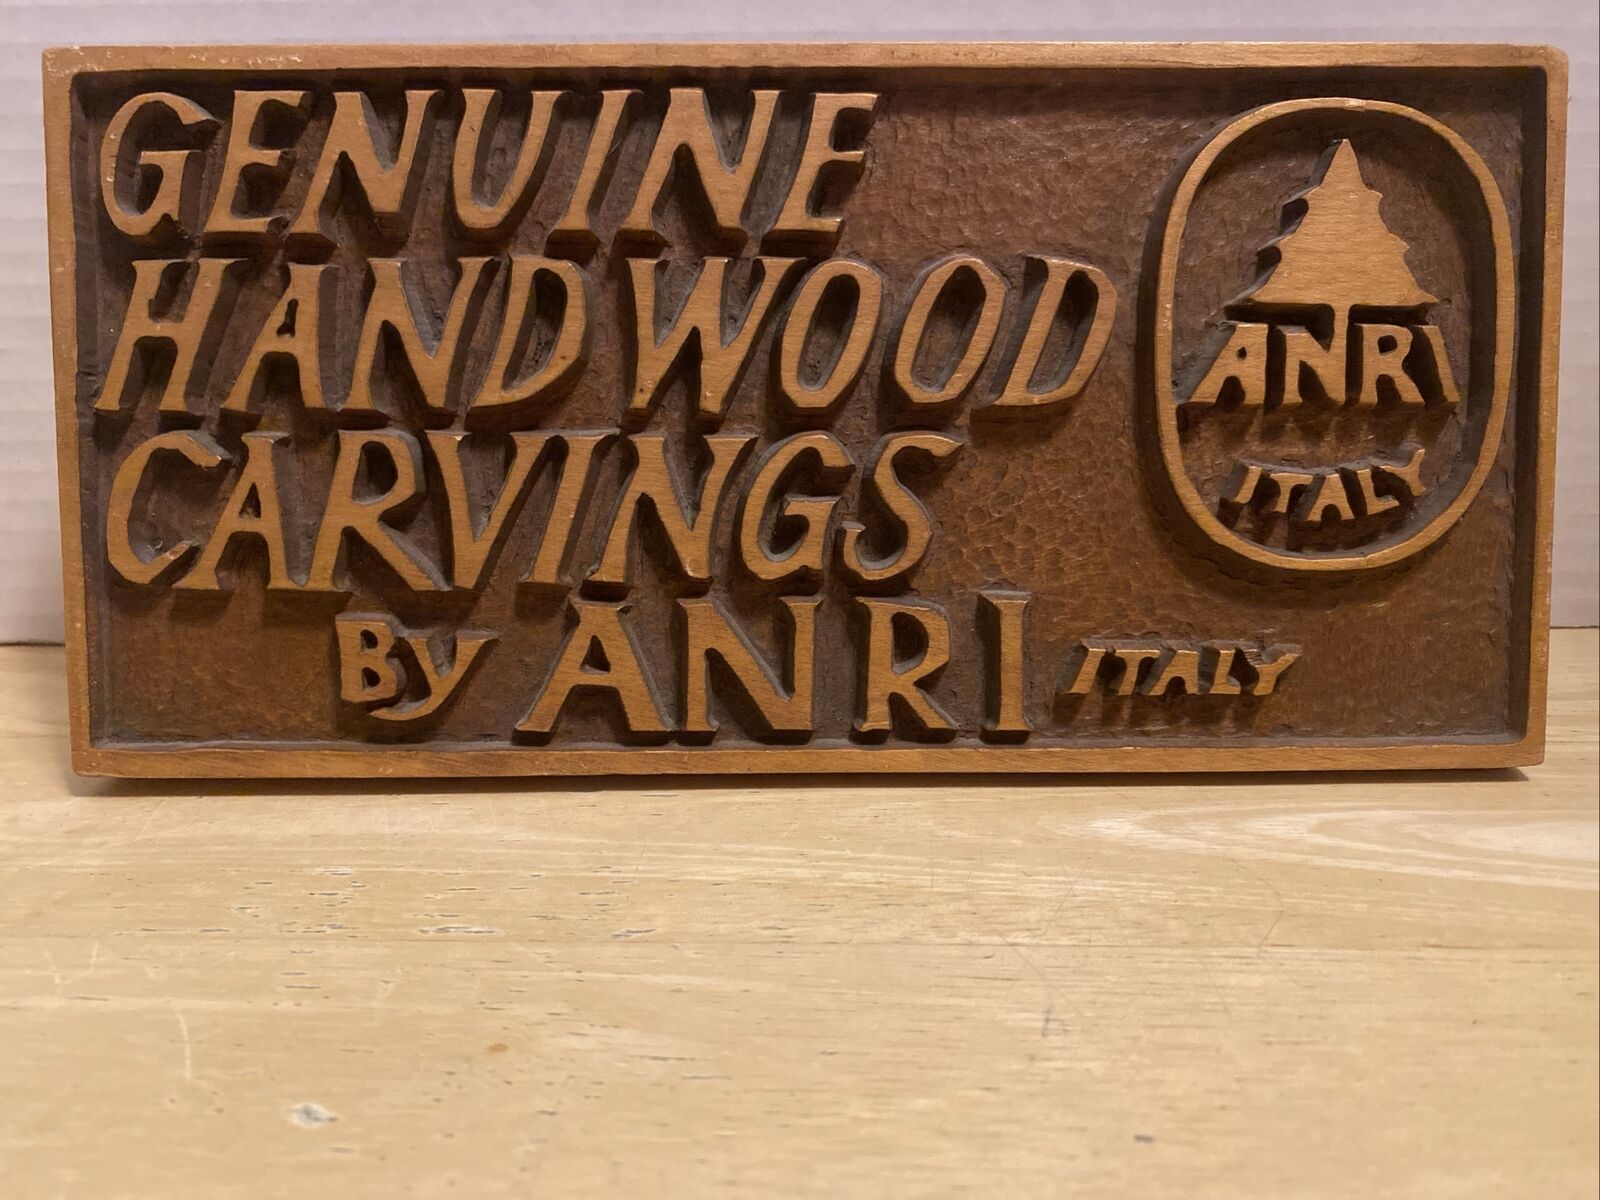 Genuine Hardwood Carvings by Anri Sign Display Wood Carved Rare Italy 9.5” X 5”